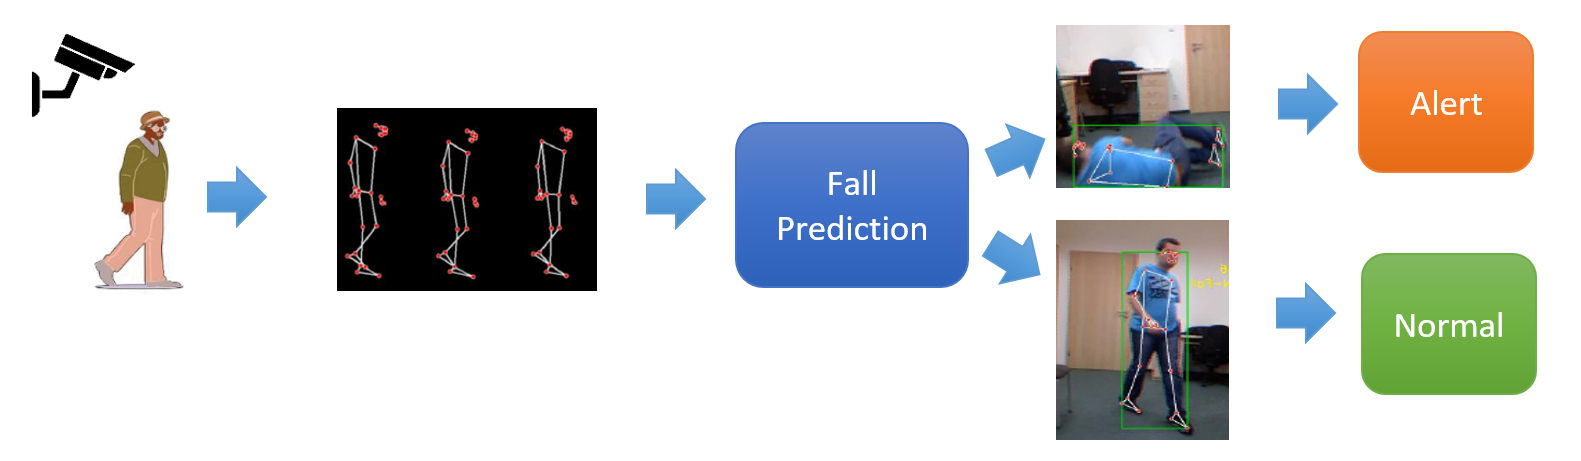 Fall Detection and Motion Analysis Using Visual Approaches